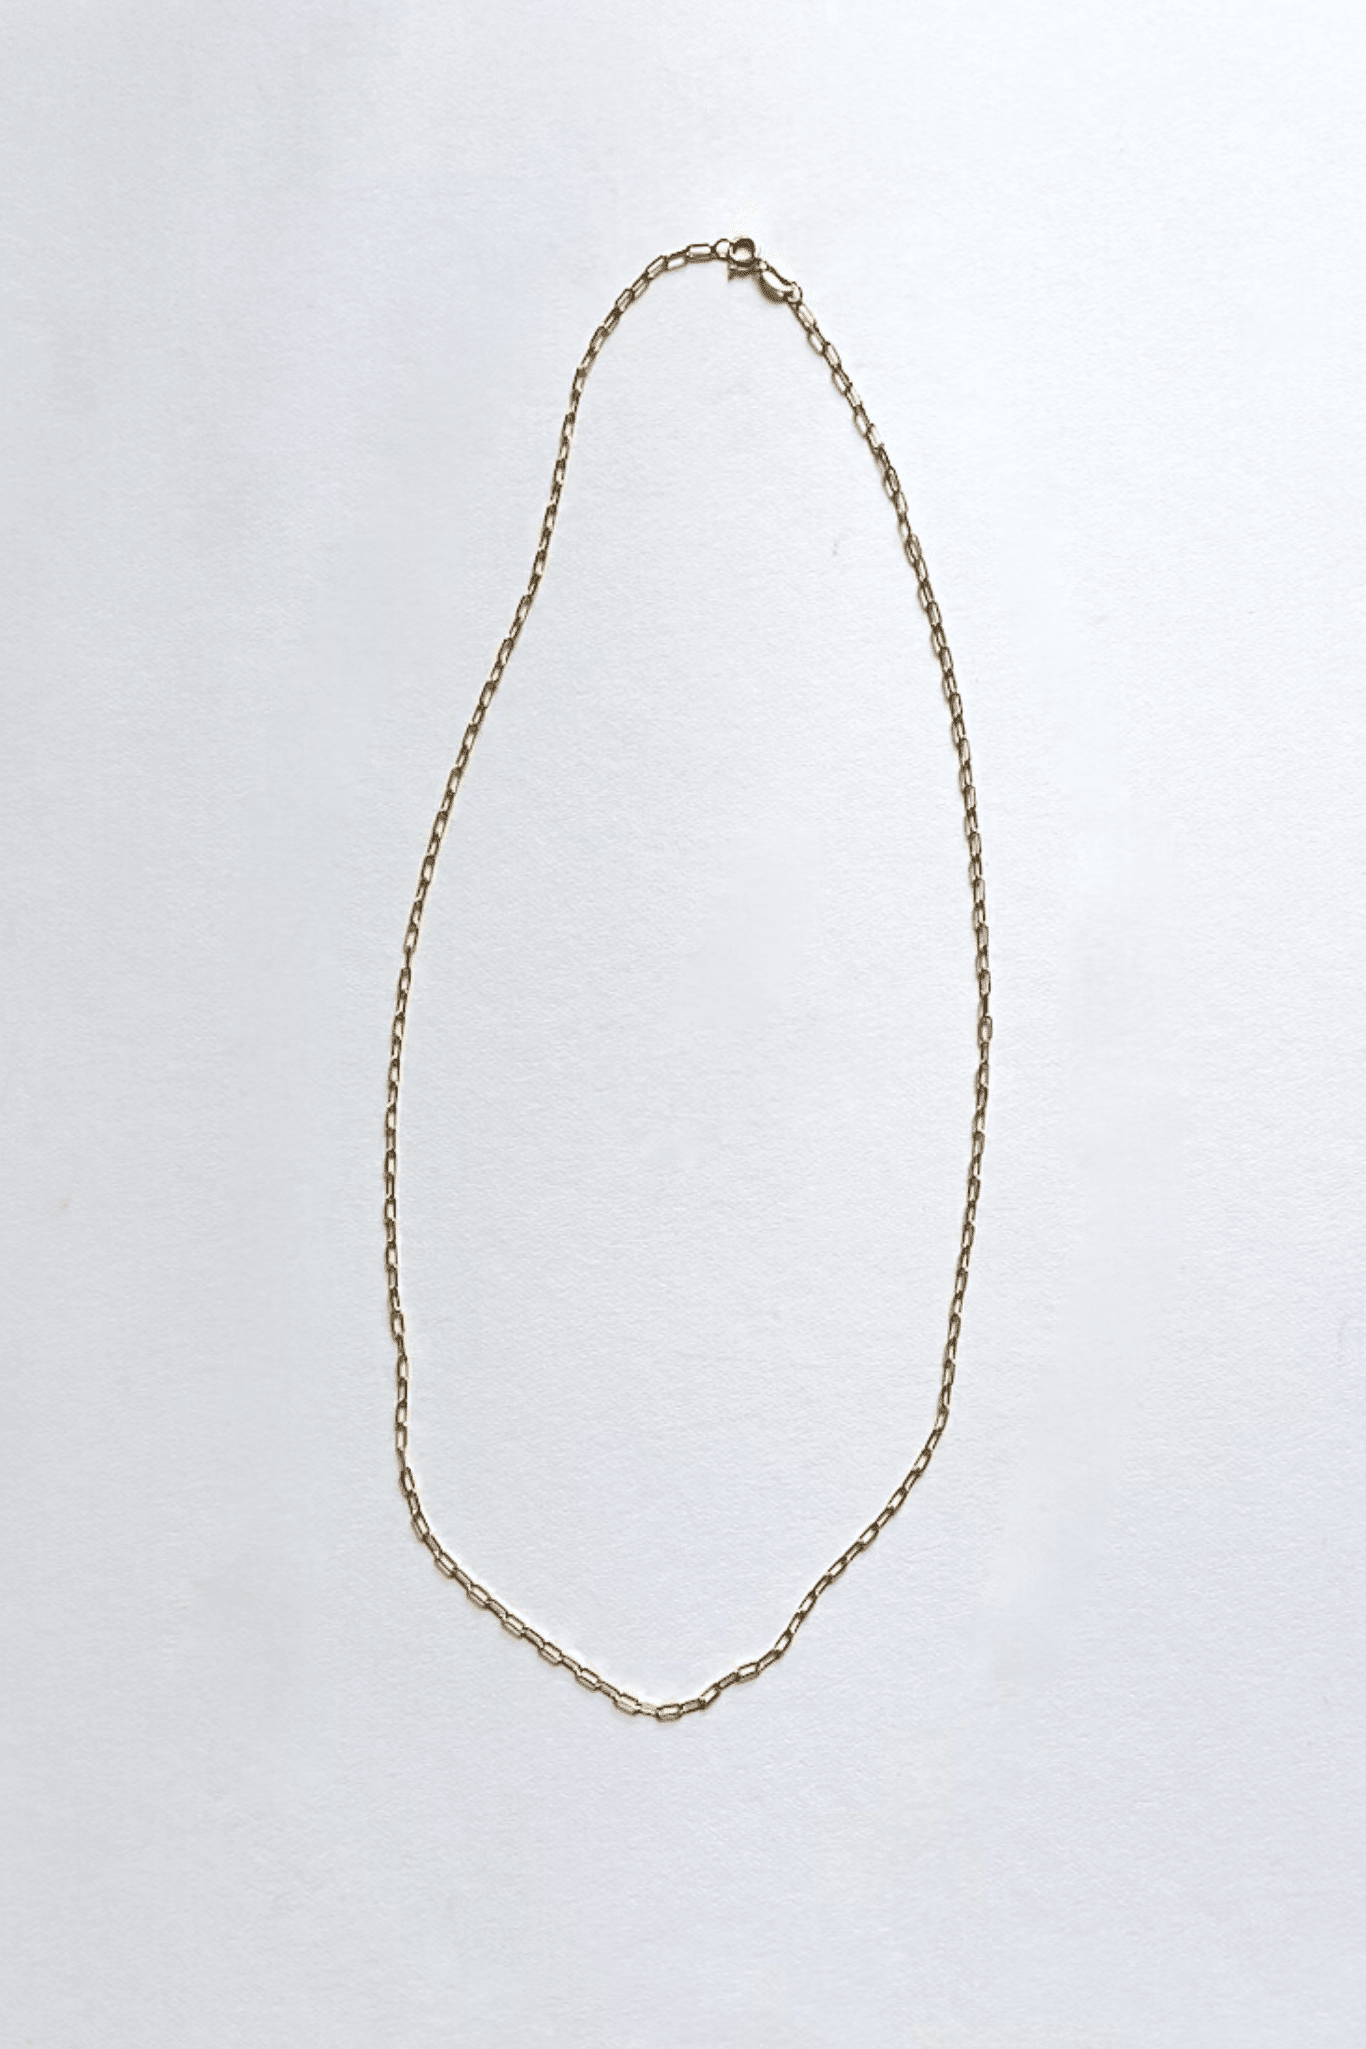 Carrie Hoffman - 14K 18” Paperclip Chain